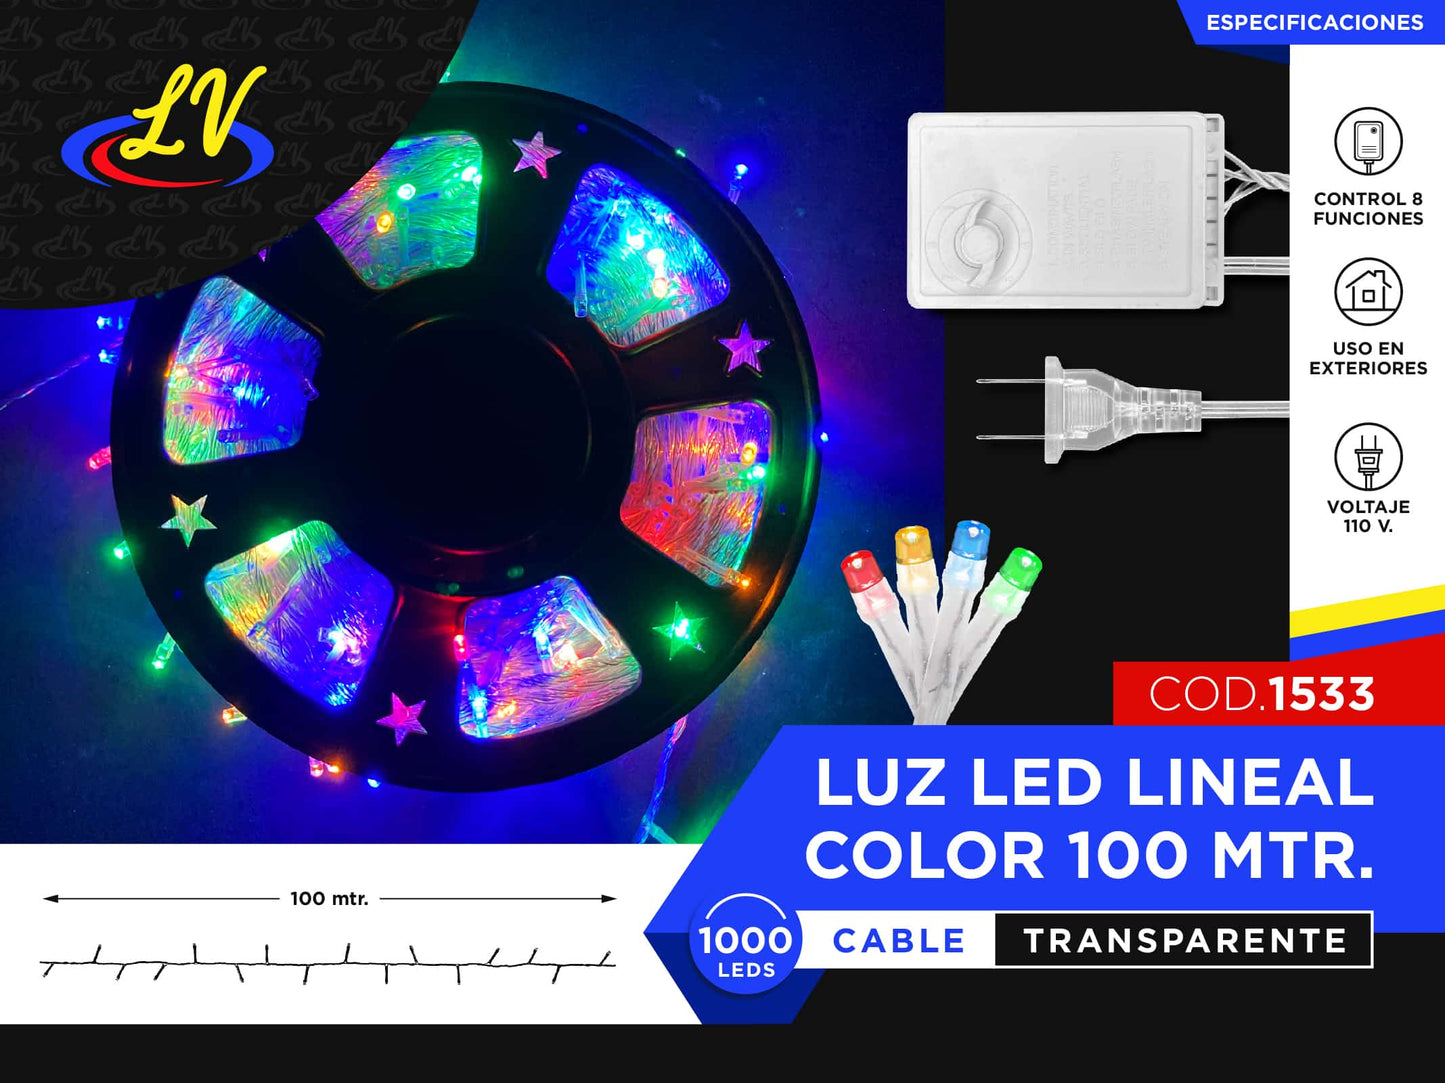 LINEAL TIPO UL – MULTICOLOR – 100 MTS